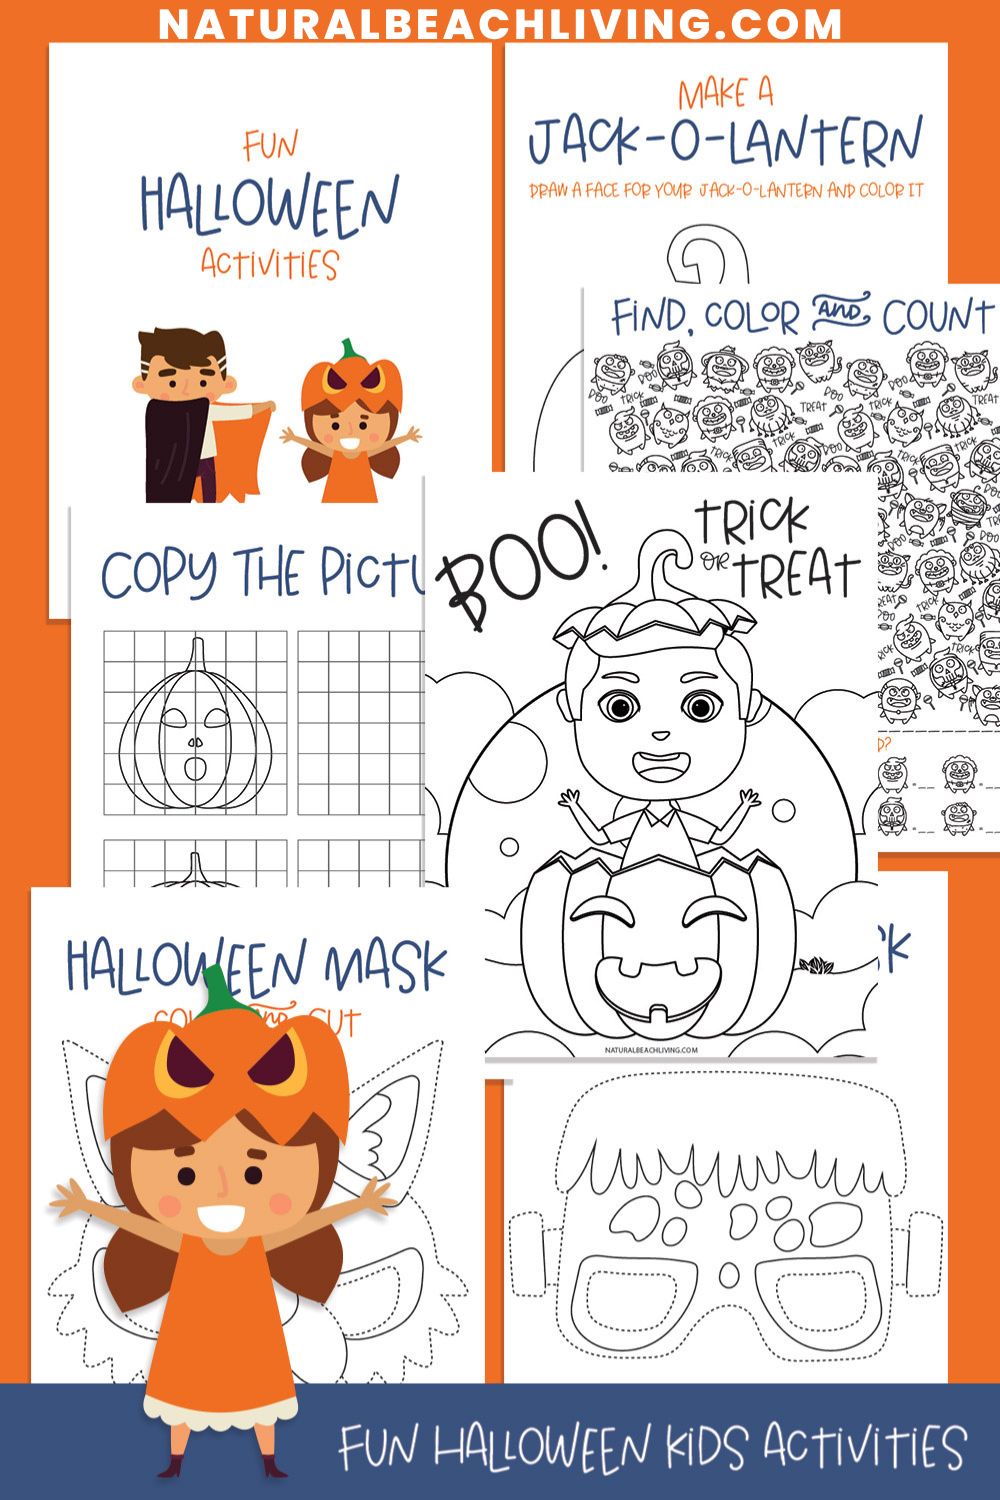 Check out these fun Halloween printables for kids and enjoy the best Halloween activities, learning ideas, and more with your family this year. Or use these free Halloween printables in your classroom or as Halloween Party Ideas.